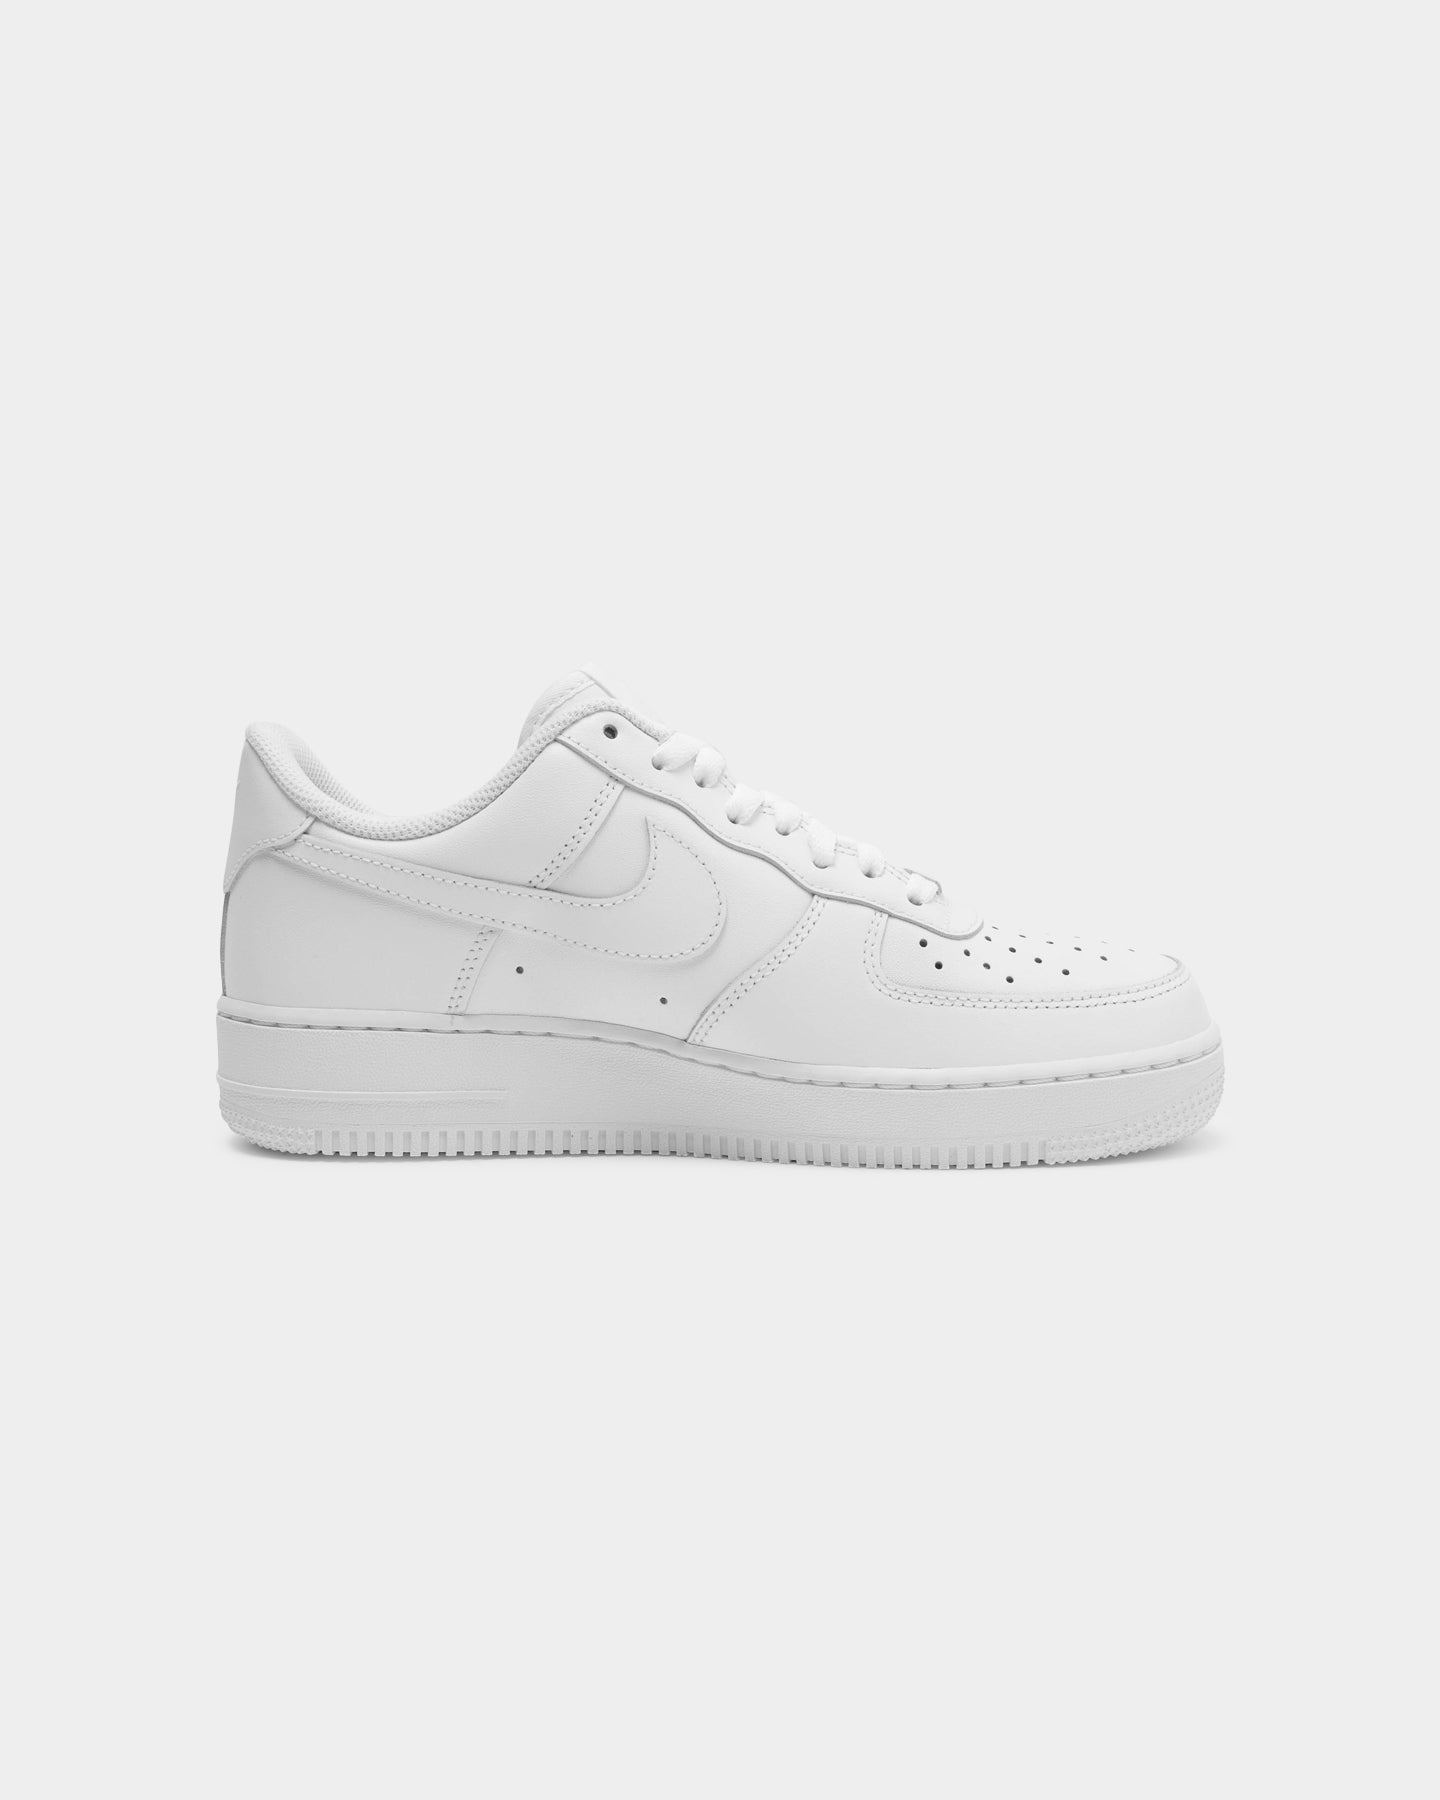 nike air force 1 white womens size 6.5